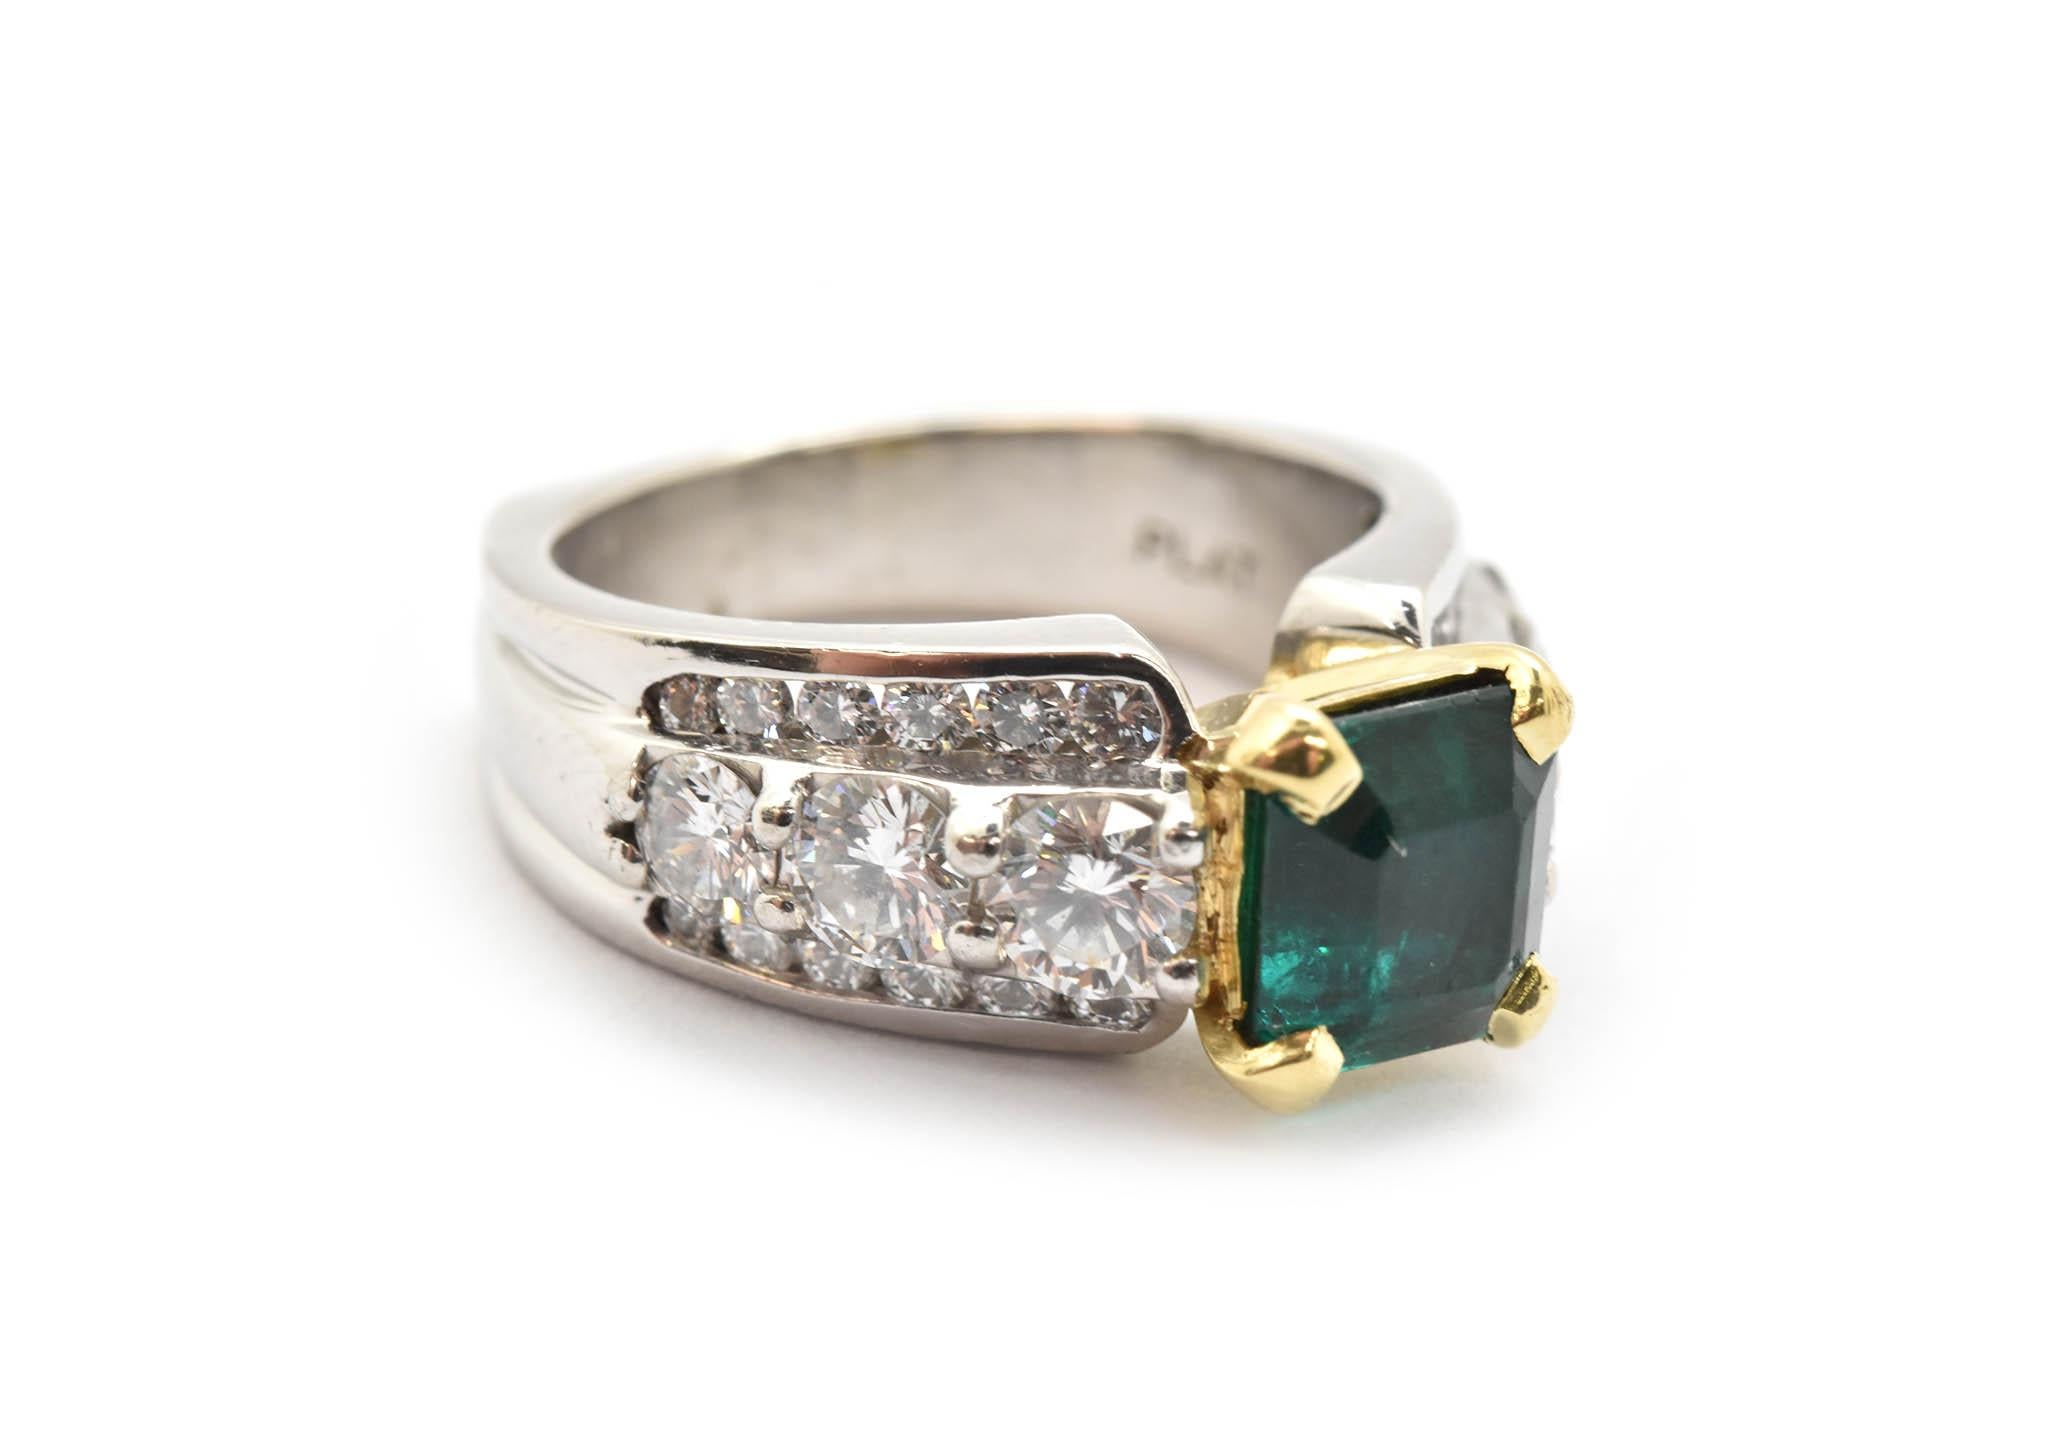 From Scott Kay’s collection, this 1.50 carat emerald and 1.40cttw diamond ring combine the geometric mounting and strong colored emerald to make for a real spectacle! The center square-cut emerald is set with 18k yellow gold stylized prongs. The